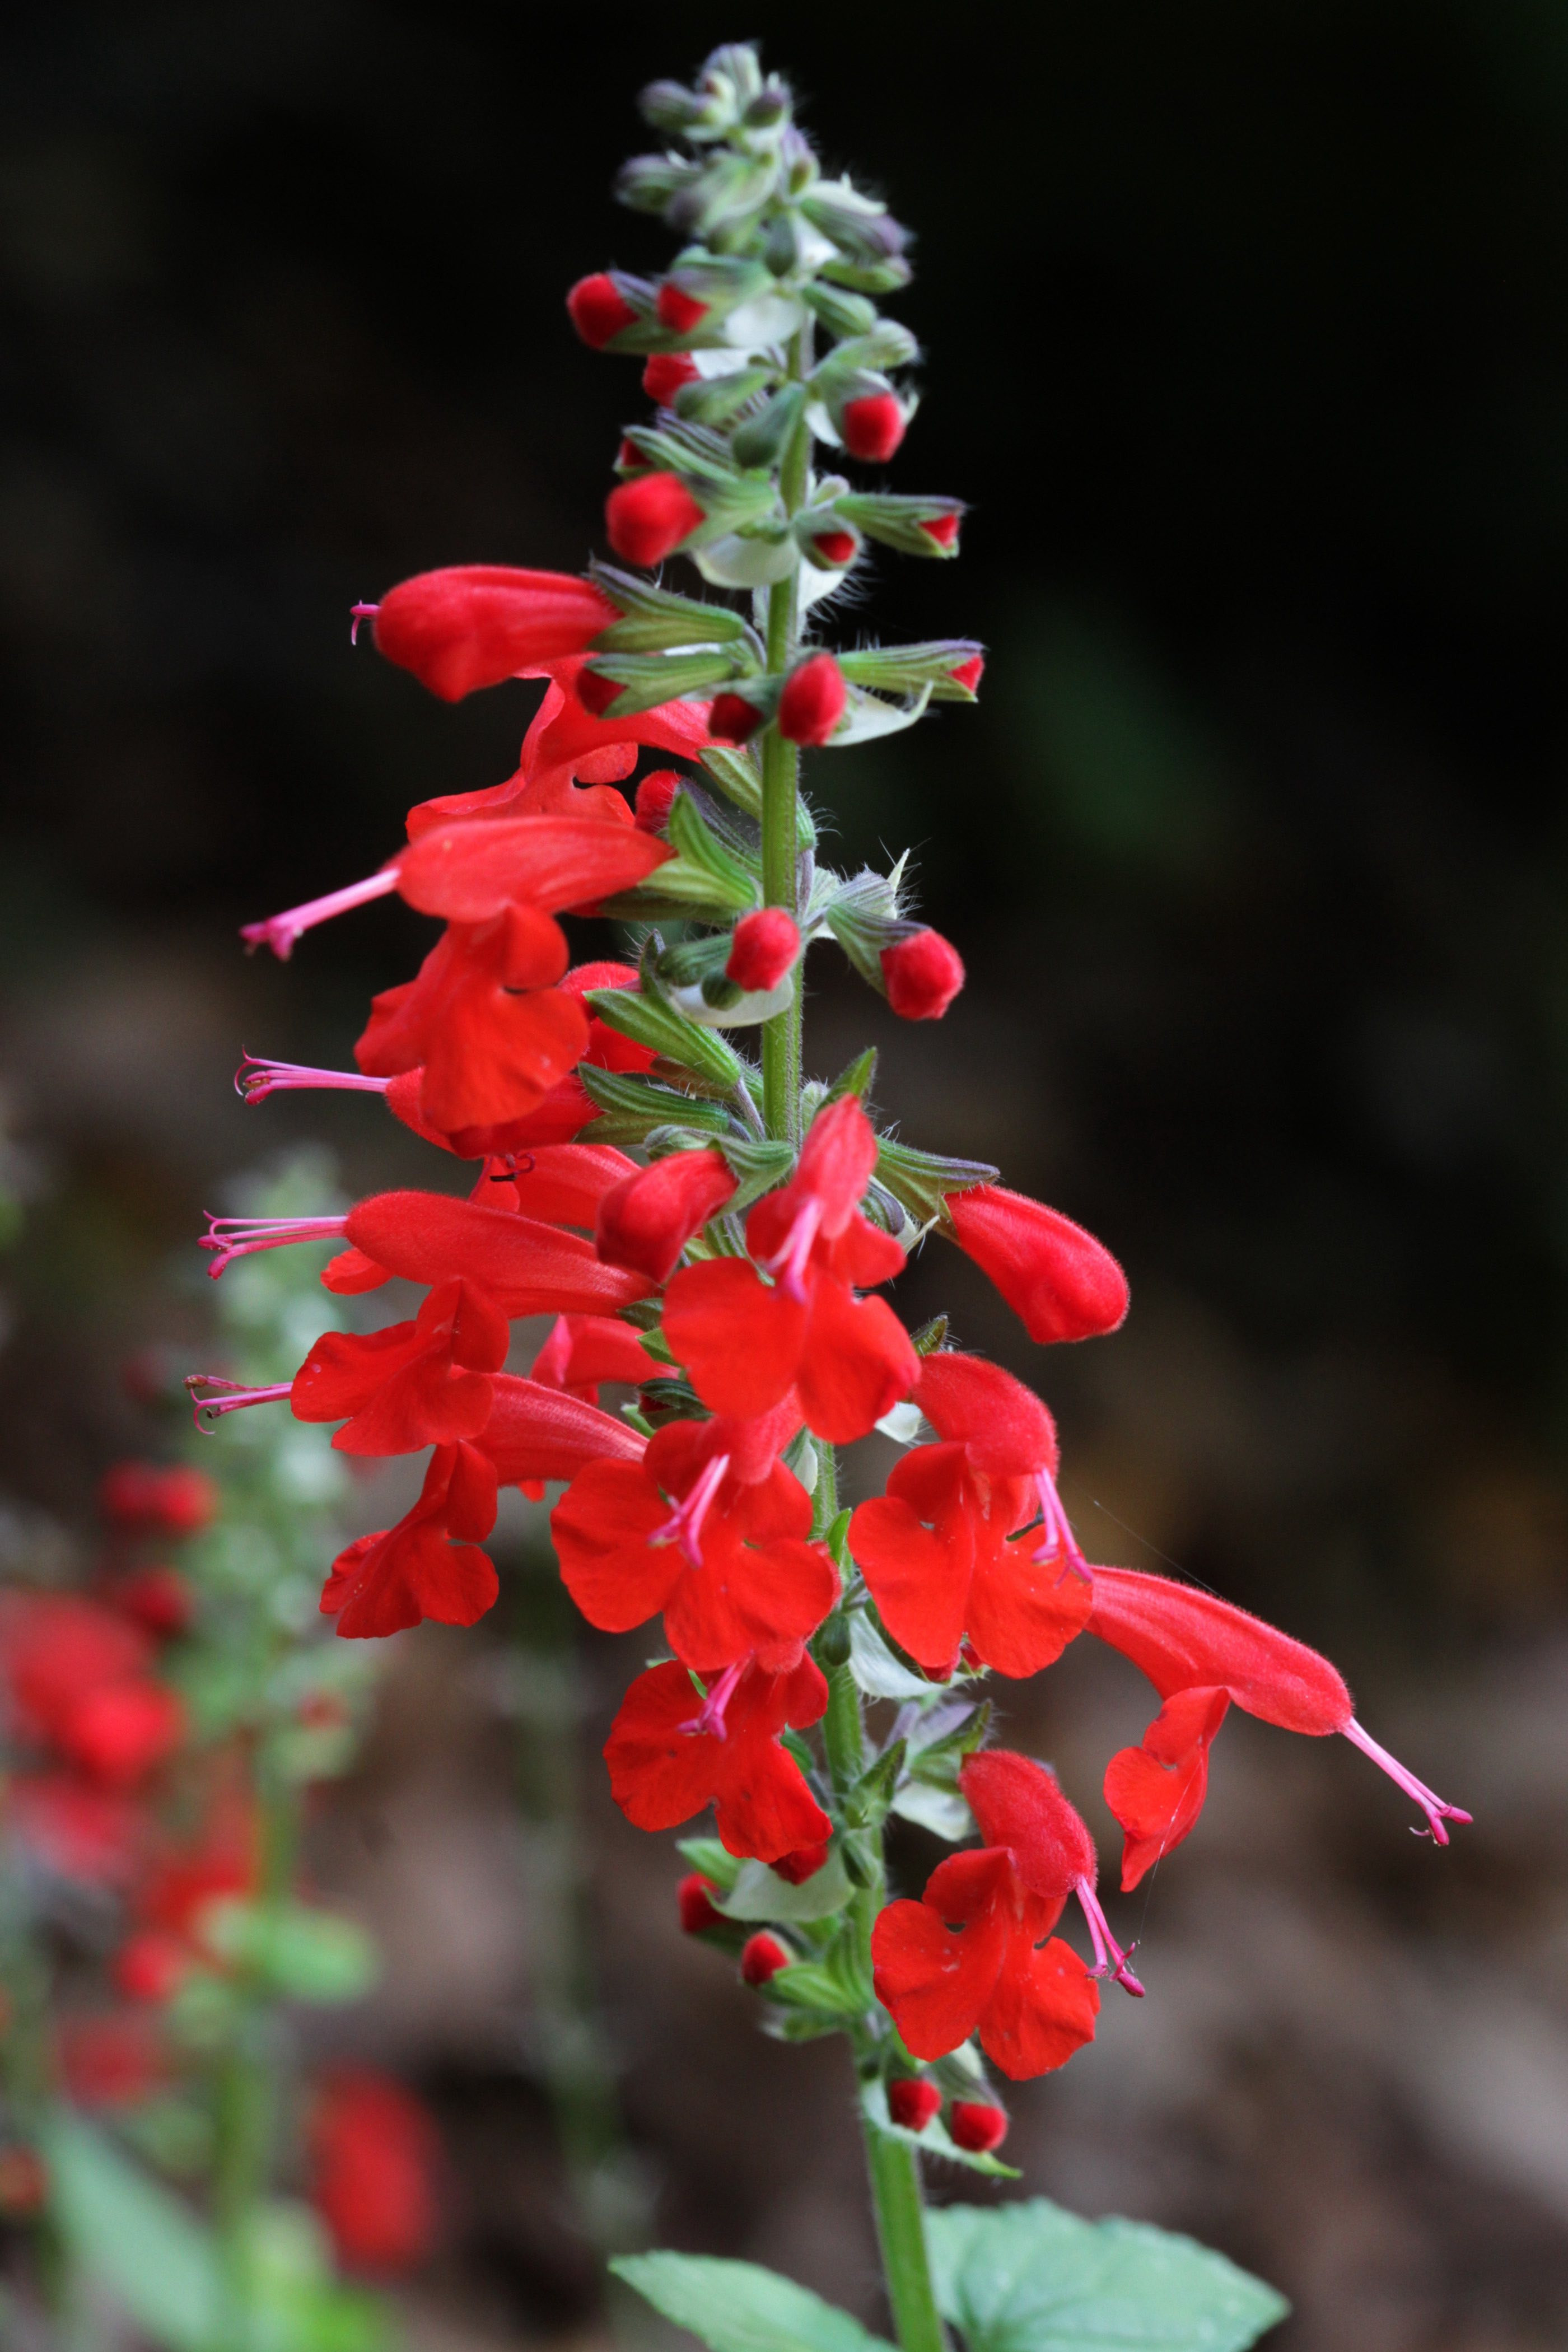 The Scientific Name is Salvia coccinea. You will likely hear them called Scarlet Sage, Blood Sage, Tropical Sage. This picture shows the Blossoms are bright red, the corolla two-lipped, the lower lip notched, in a densely packed terminal spike. of Salvia coccinea